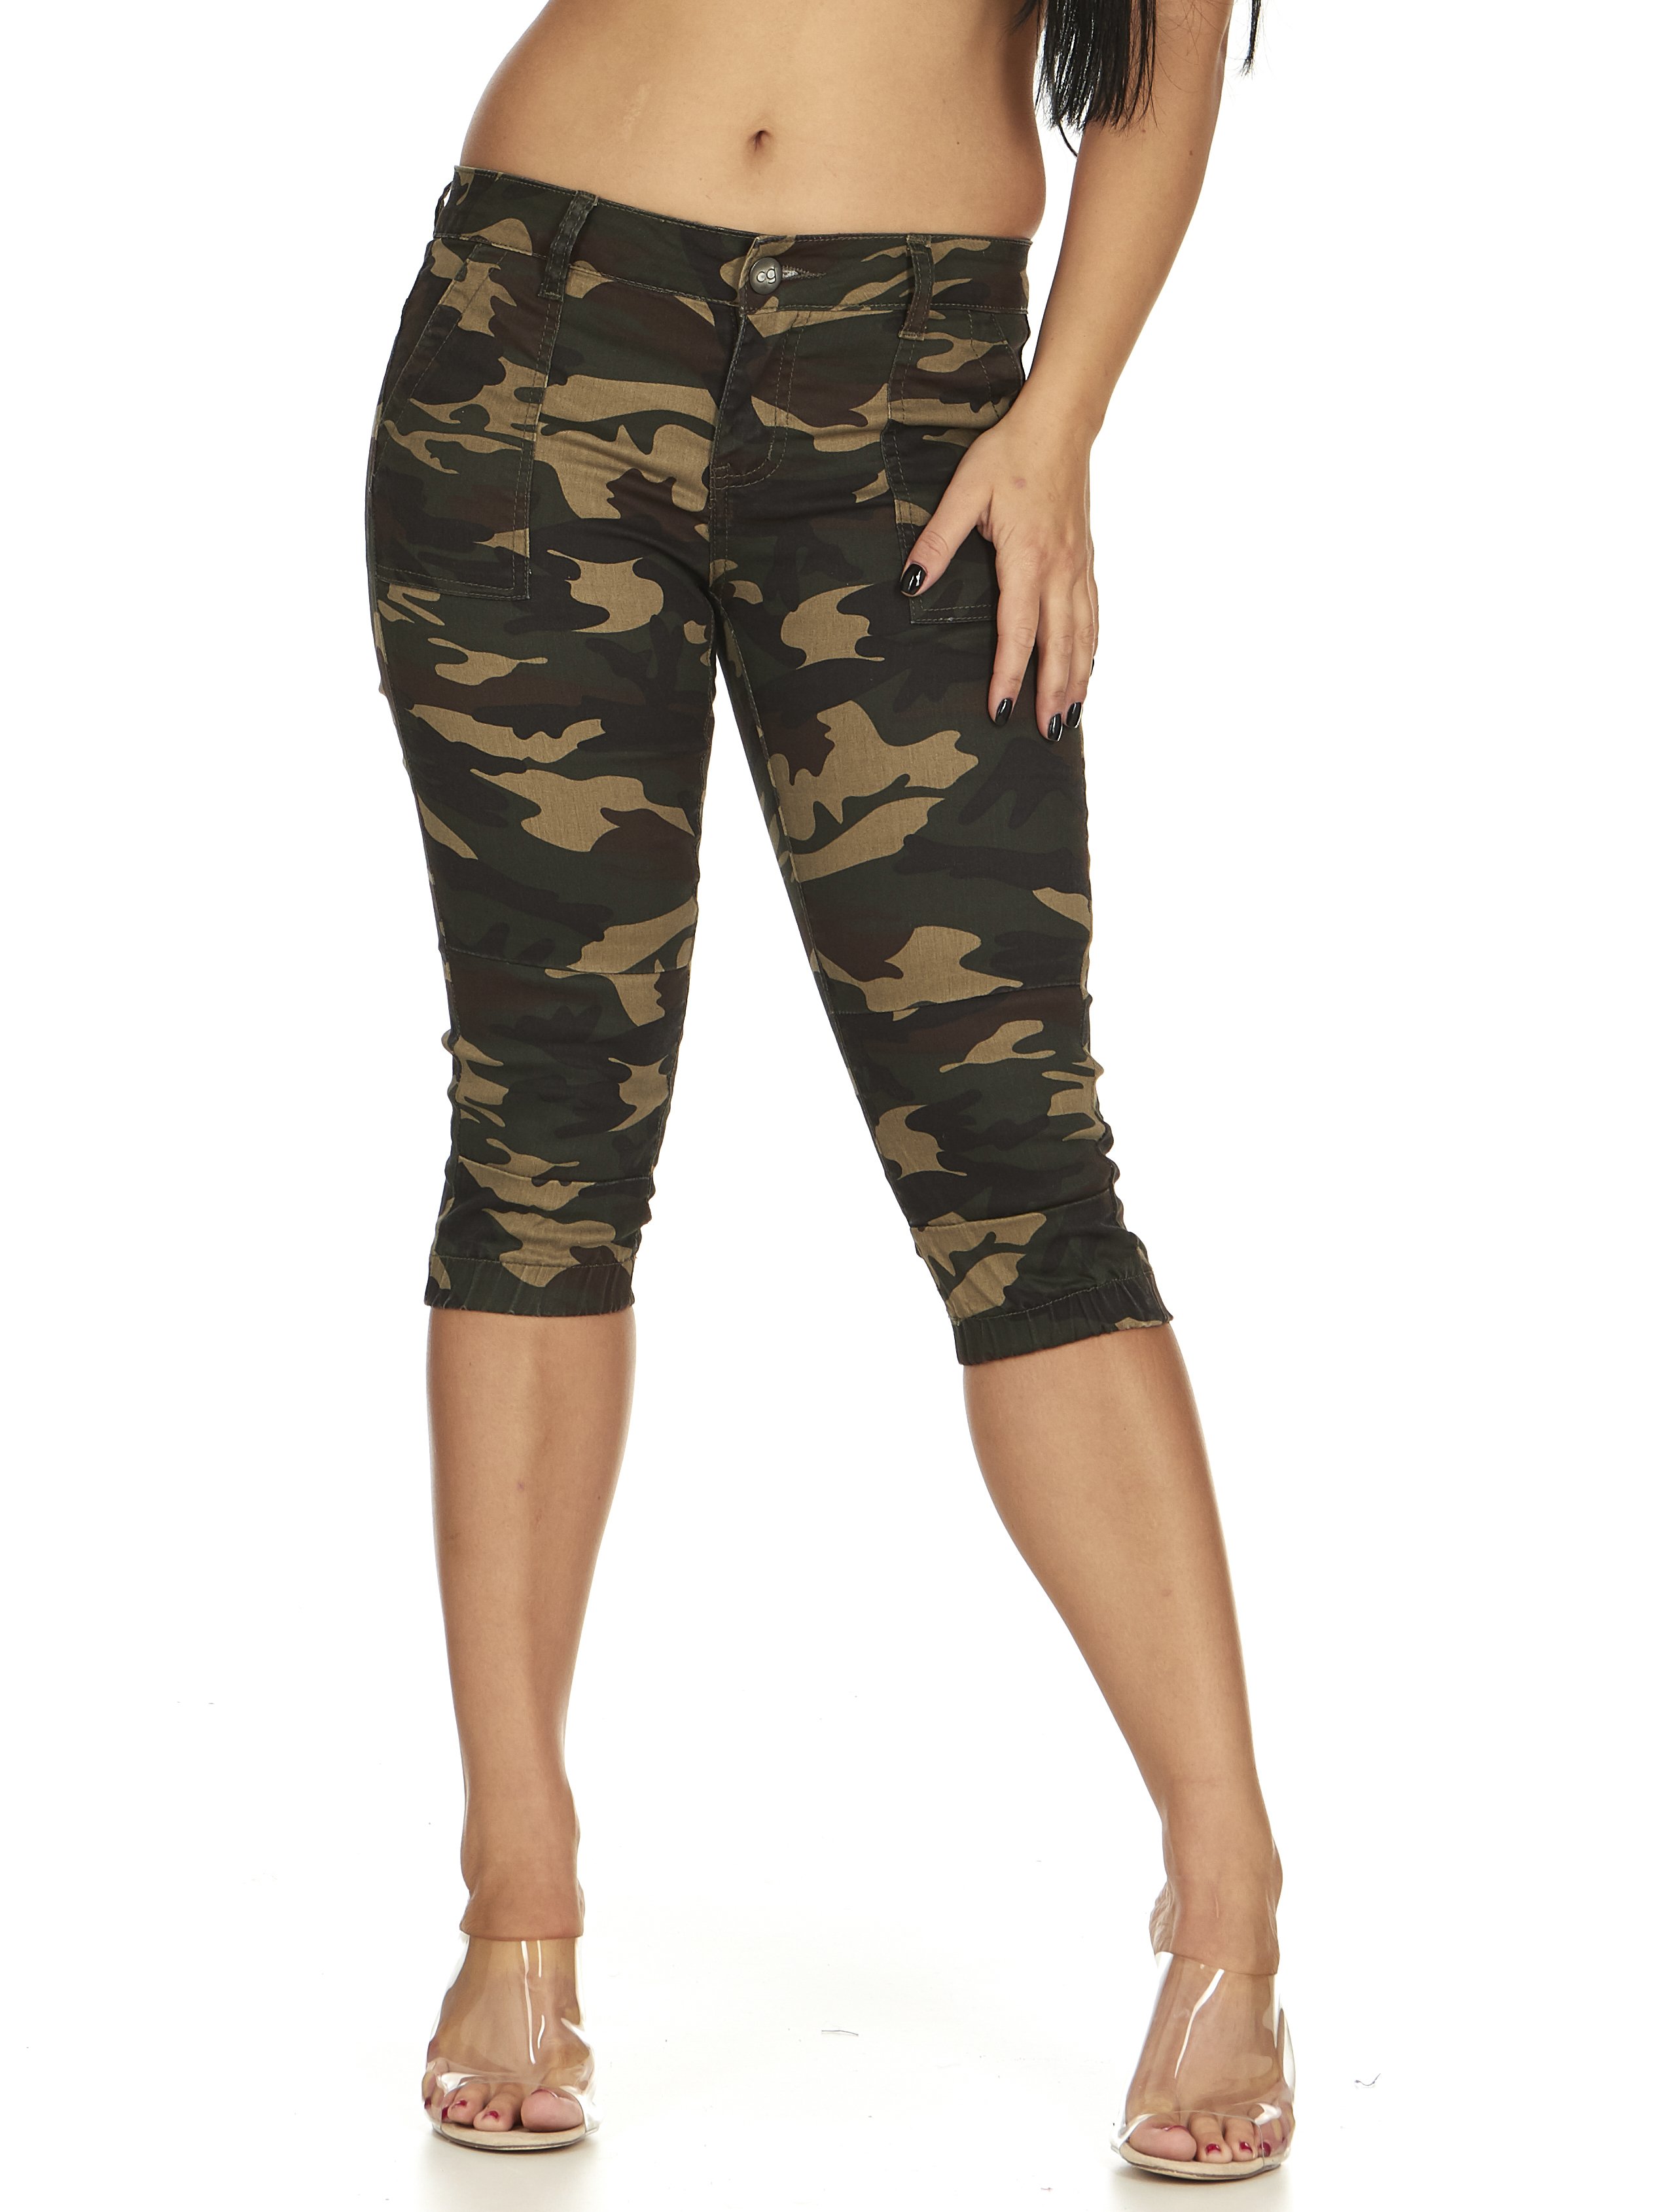 Cute Teen Girl Jeans Plus Size Capri Pants for Teen Girls in Camo Size 14W - image 1 of 7